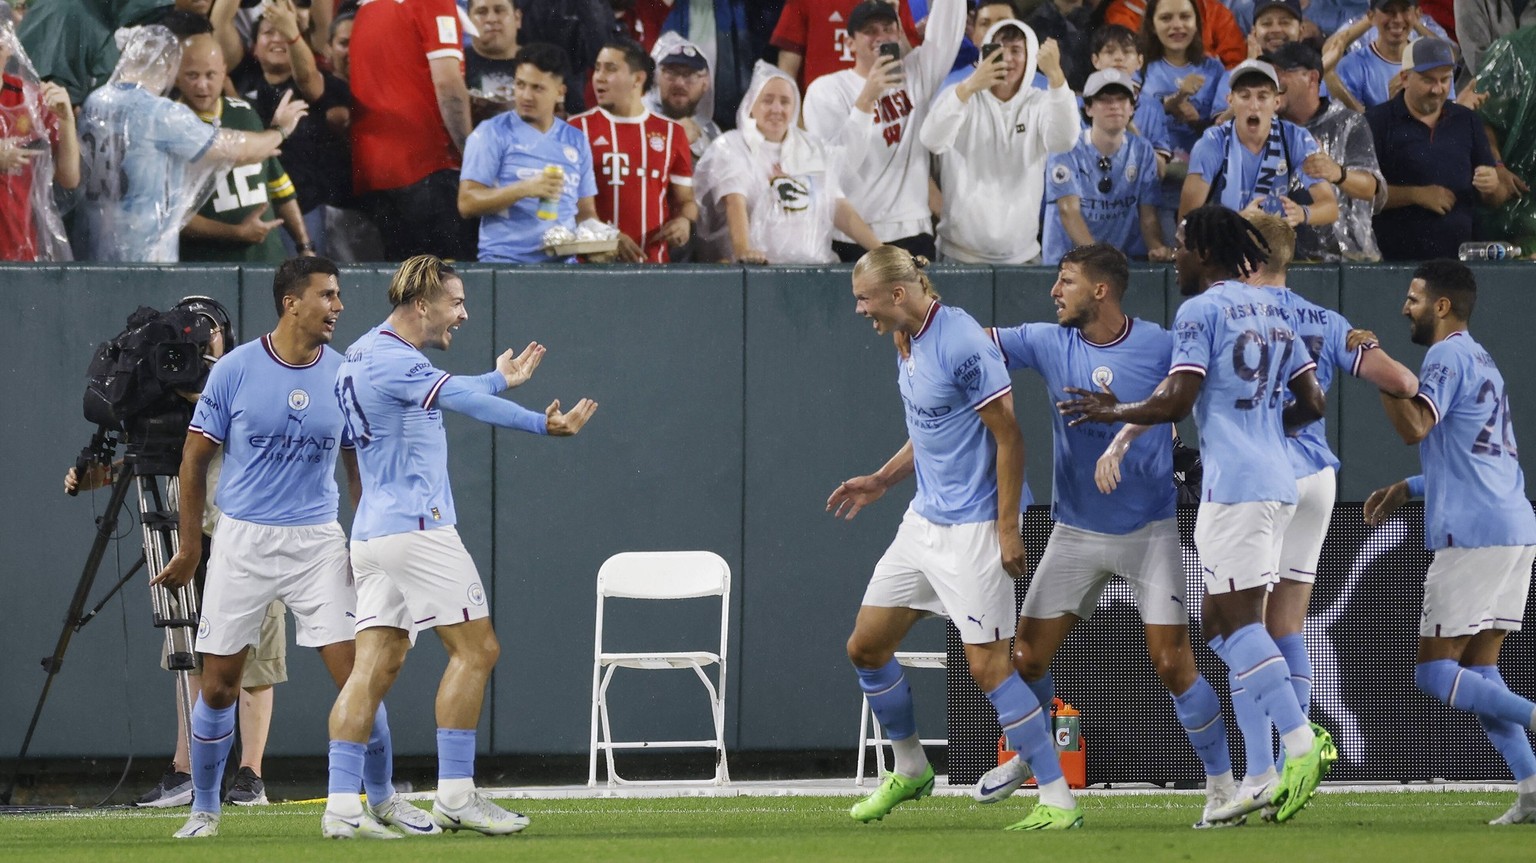 IMAGO / Icon Sportswire

Sport Bilder des Tages GREEN BAY, WI - JULY 23: Manchester City forward Erling Haaland (9) and midfielder Jack Grealish (10) are congratulated by teammates after a goal agains ...